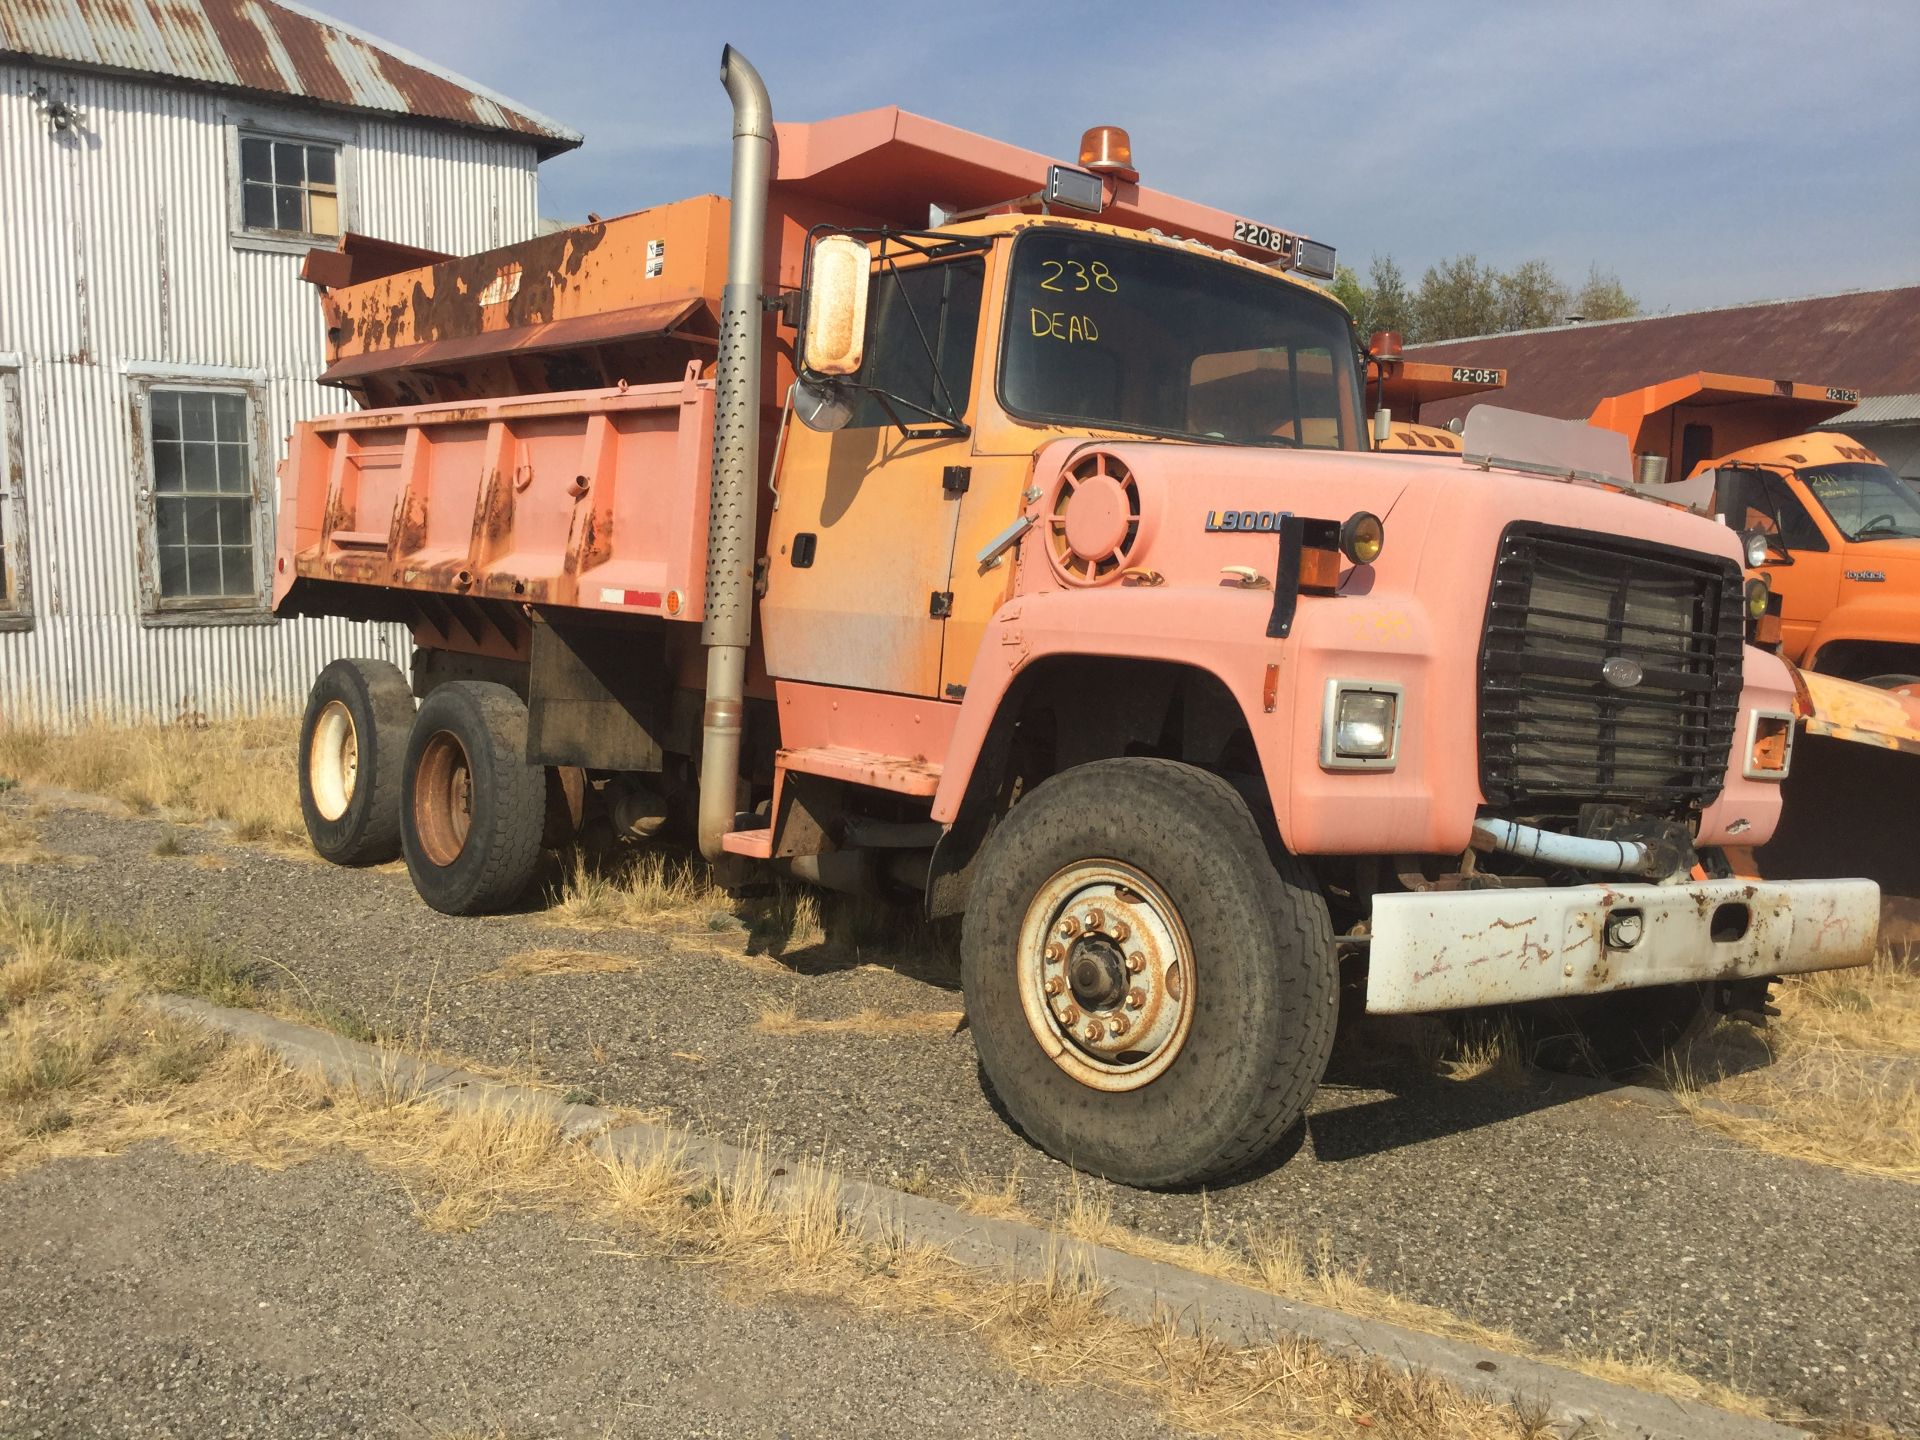 Year: 1992 Make: Ford Model: L9000 Type: Dump Truck Vin#: A33754 Mileage/Hours: 345000 10L - Image 3 of 7